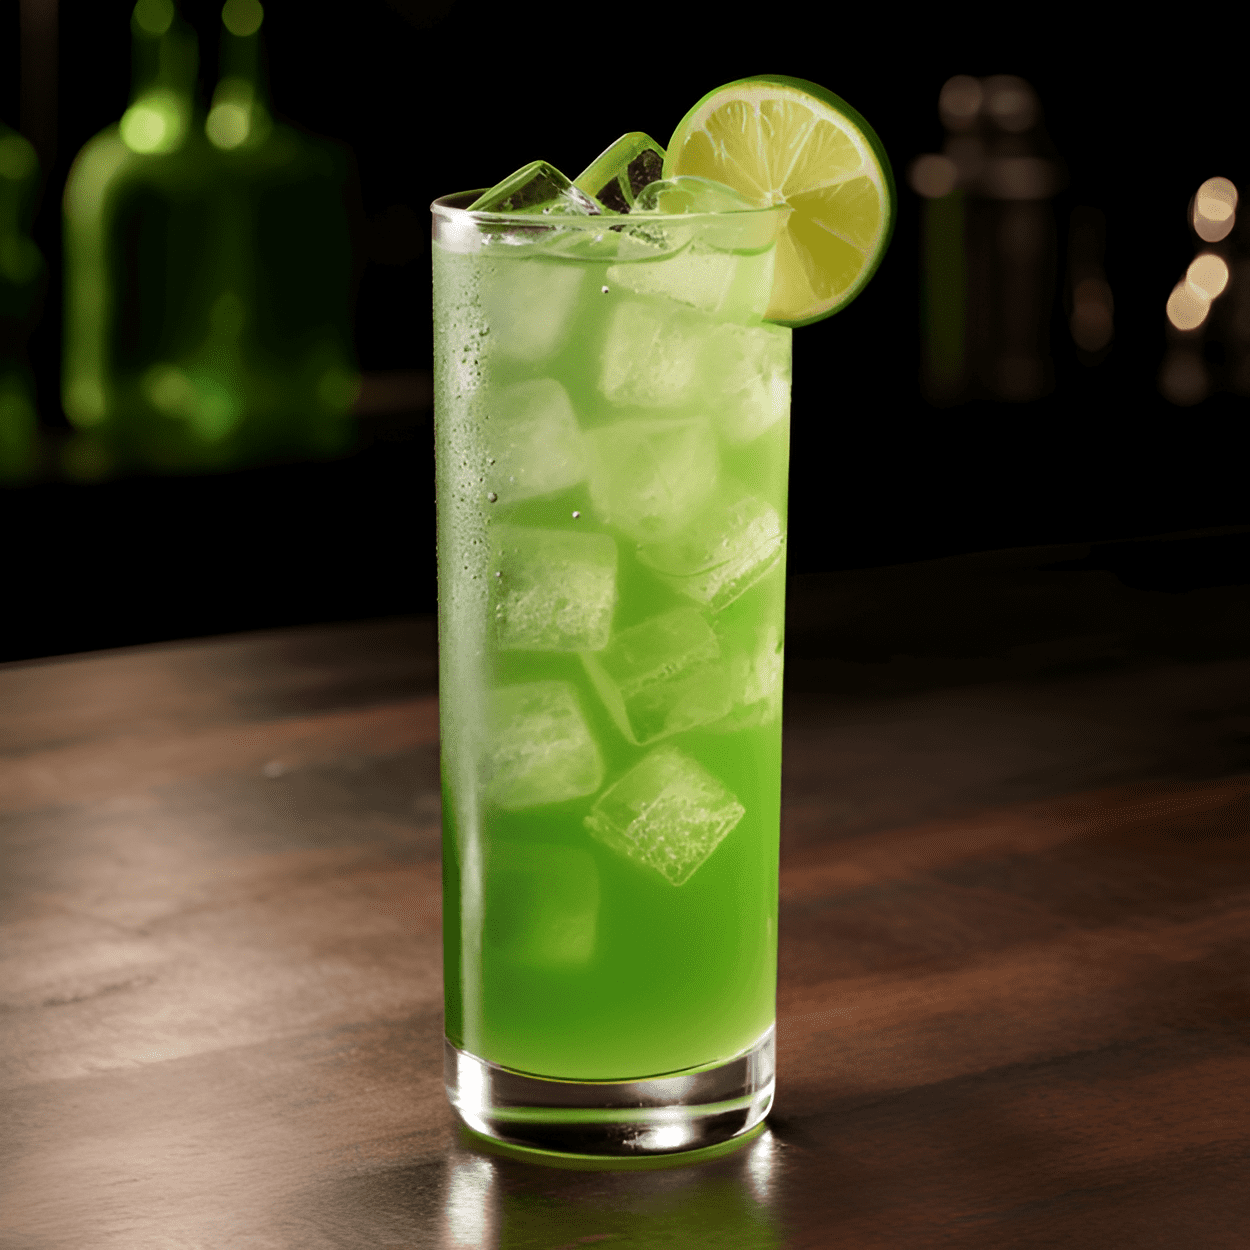 Battery Acid Cocktail Recipe - The Battery Acid cocktail is a unique blend of sweet, sour, and strong flavors. The sweetness of the Midori is balanced by the sourness of the lime juice, while the vodka adds a strong alcoholic kick.